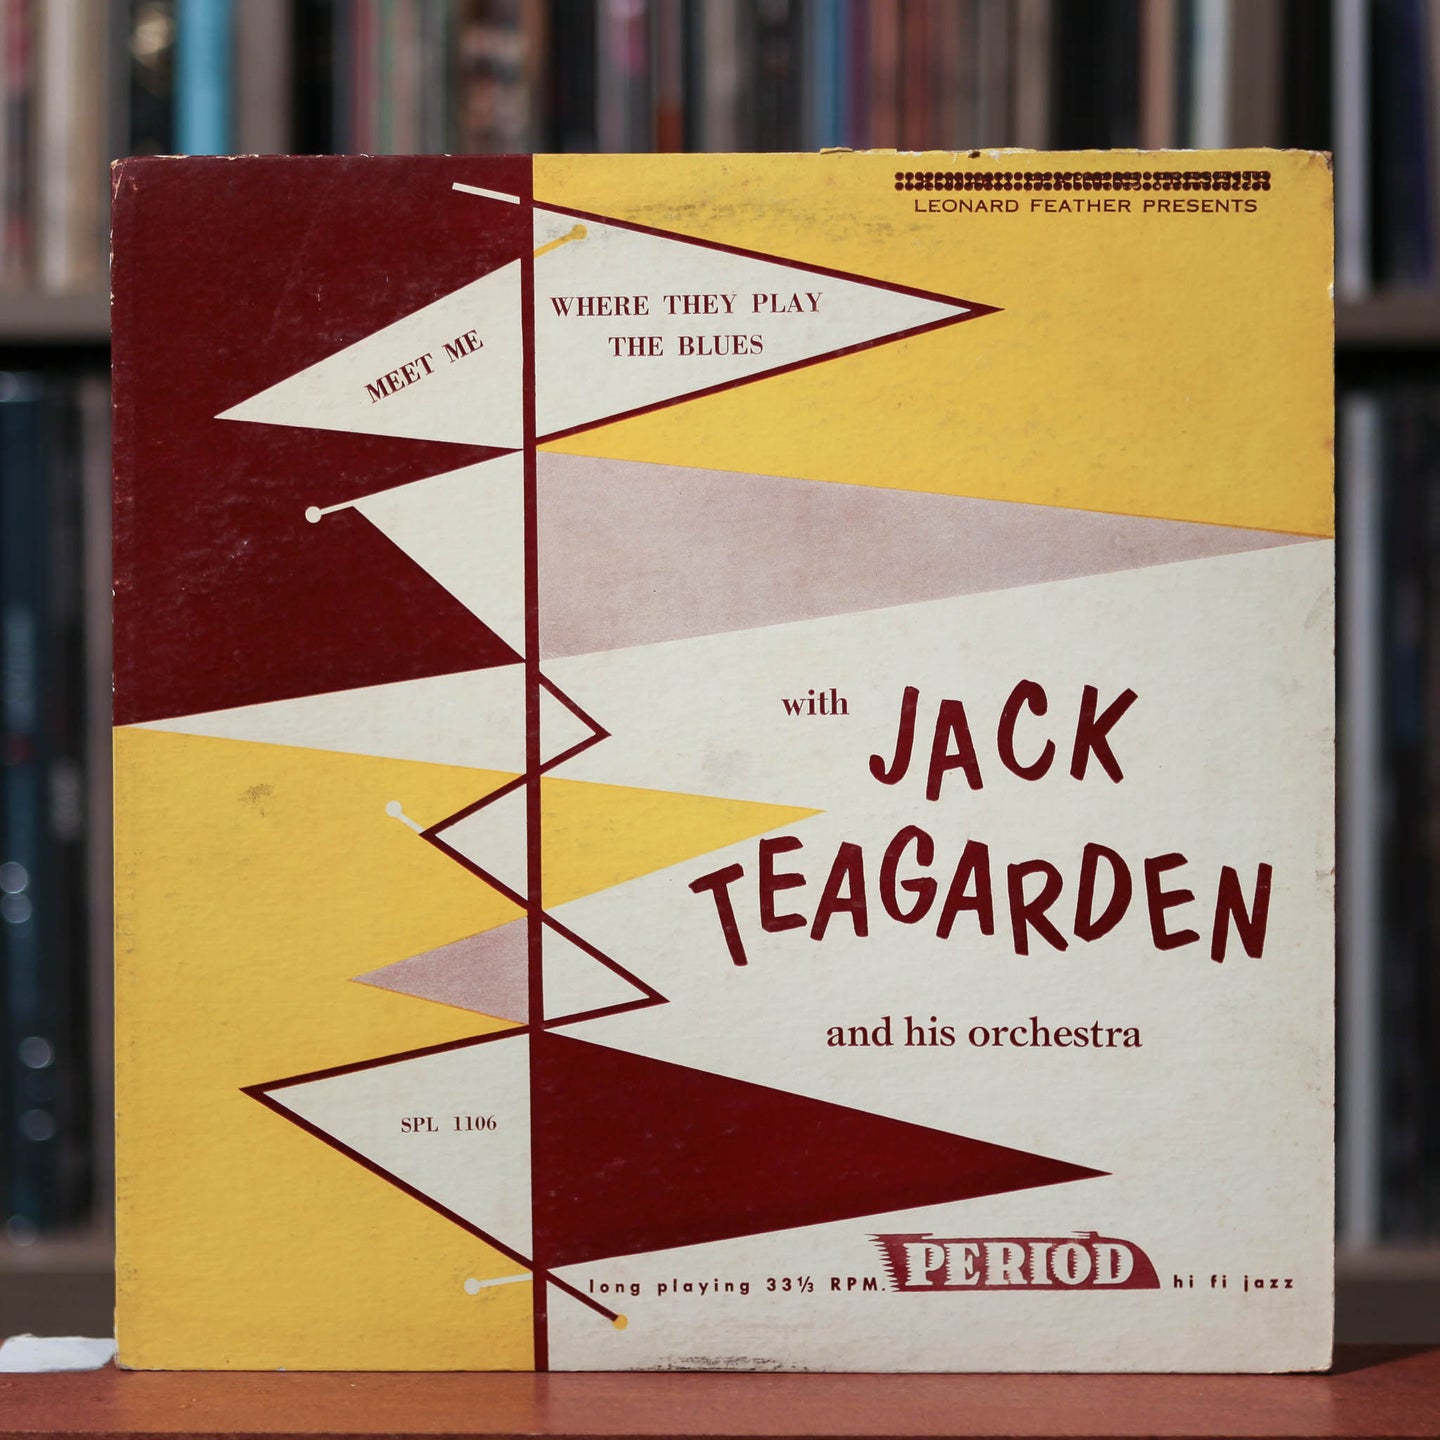 Jack Teagarden And His Orchestra - Meet Me Where They Play The Blues - 10